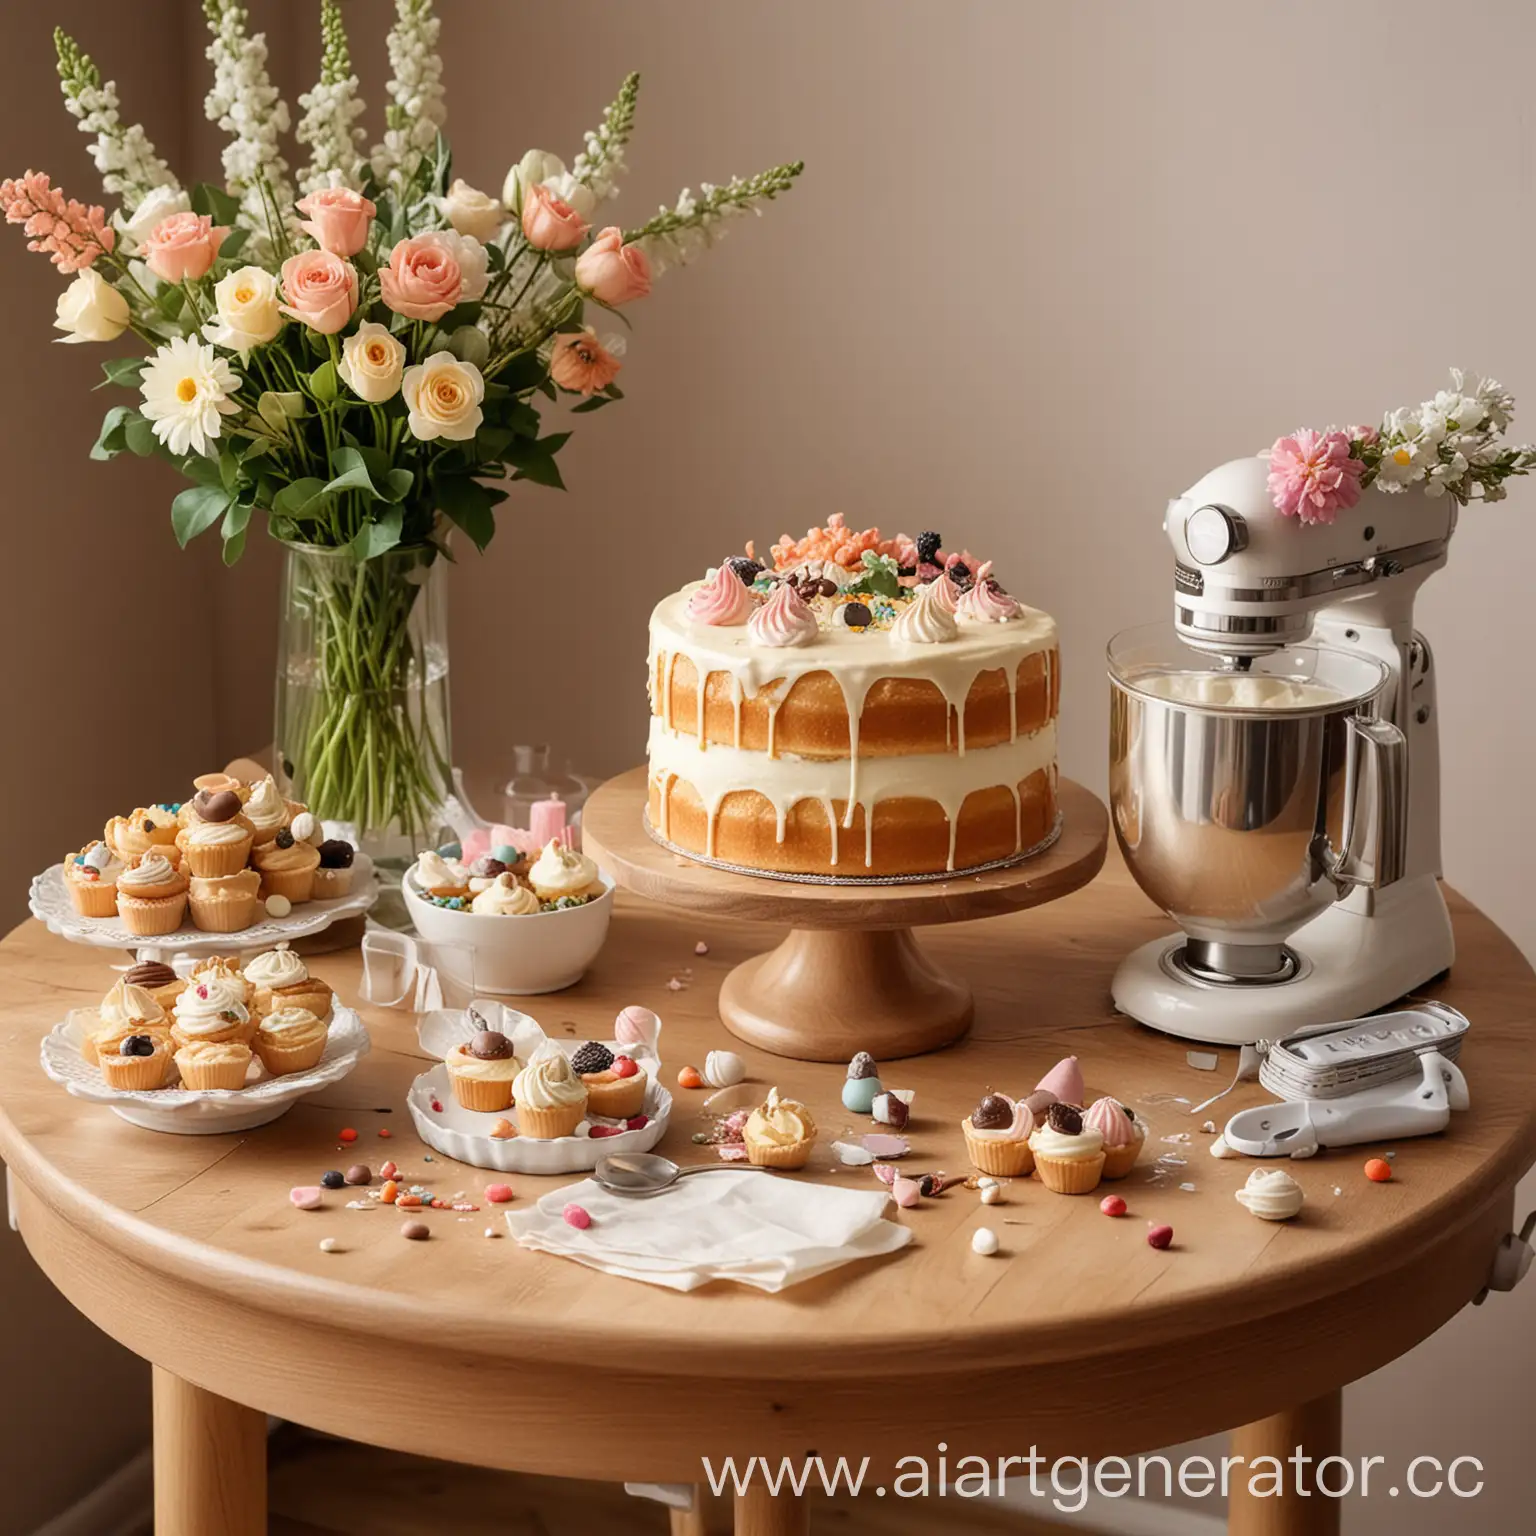 Vibrant-Confectionery-Table-with-Cake-Flowers-and-Decorations